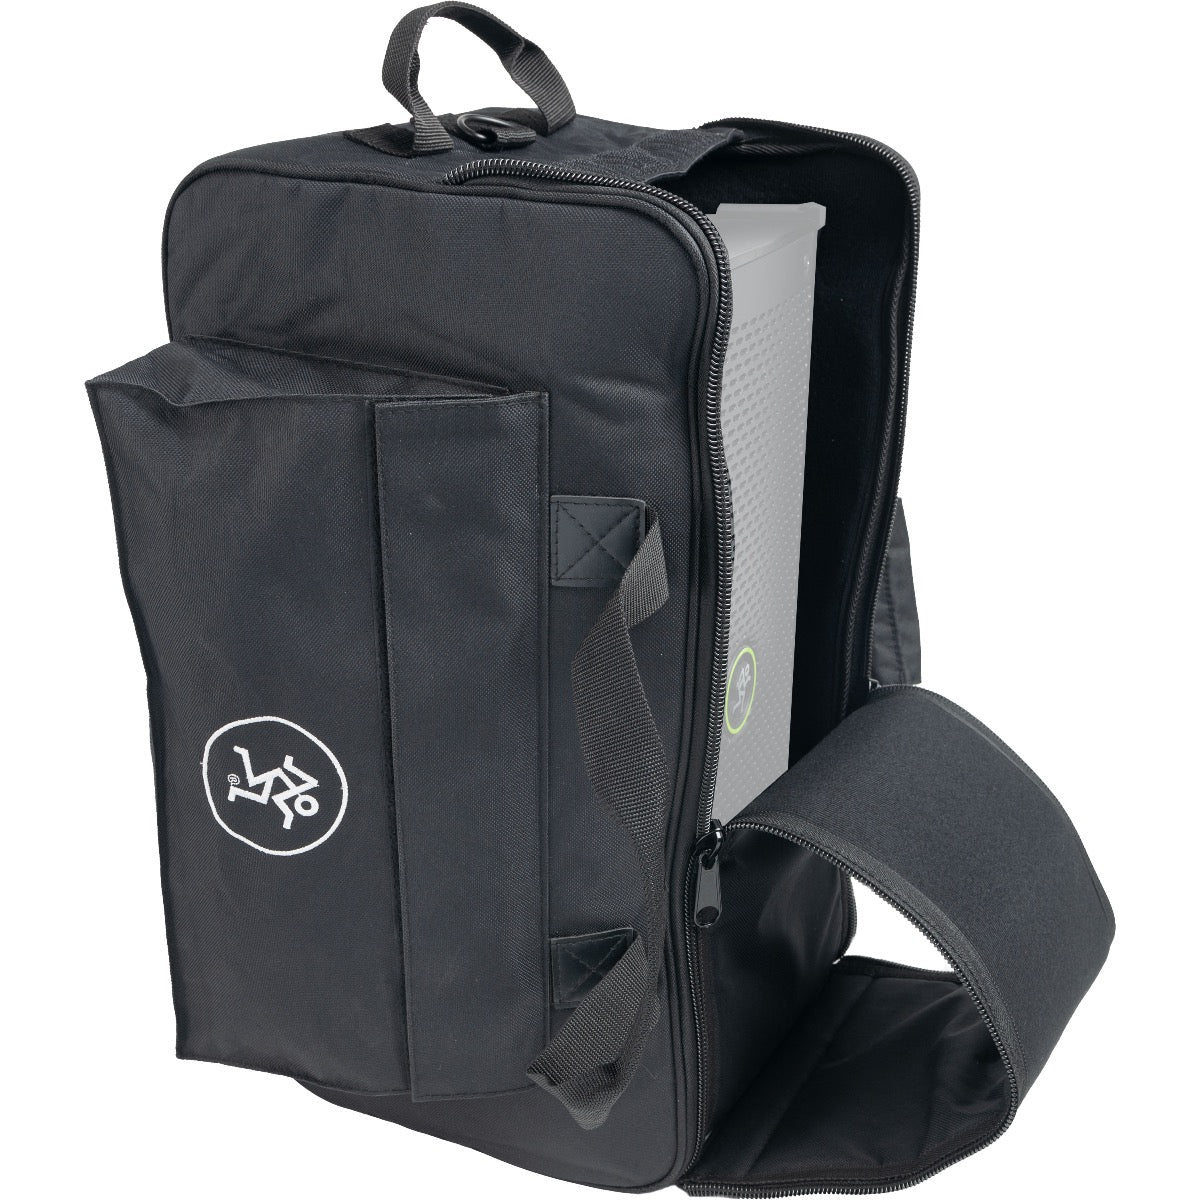 3/4 view of Mackie Thump Go Carry Bag showing top, front and left side with top open and Thump Go loudspeaker inside (sold separately) shown for reference